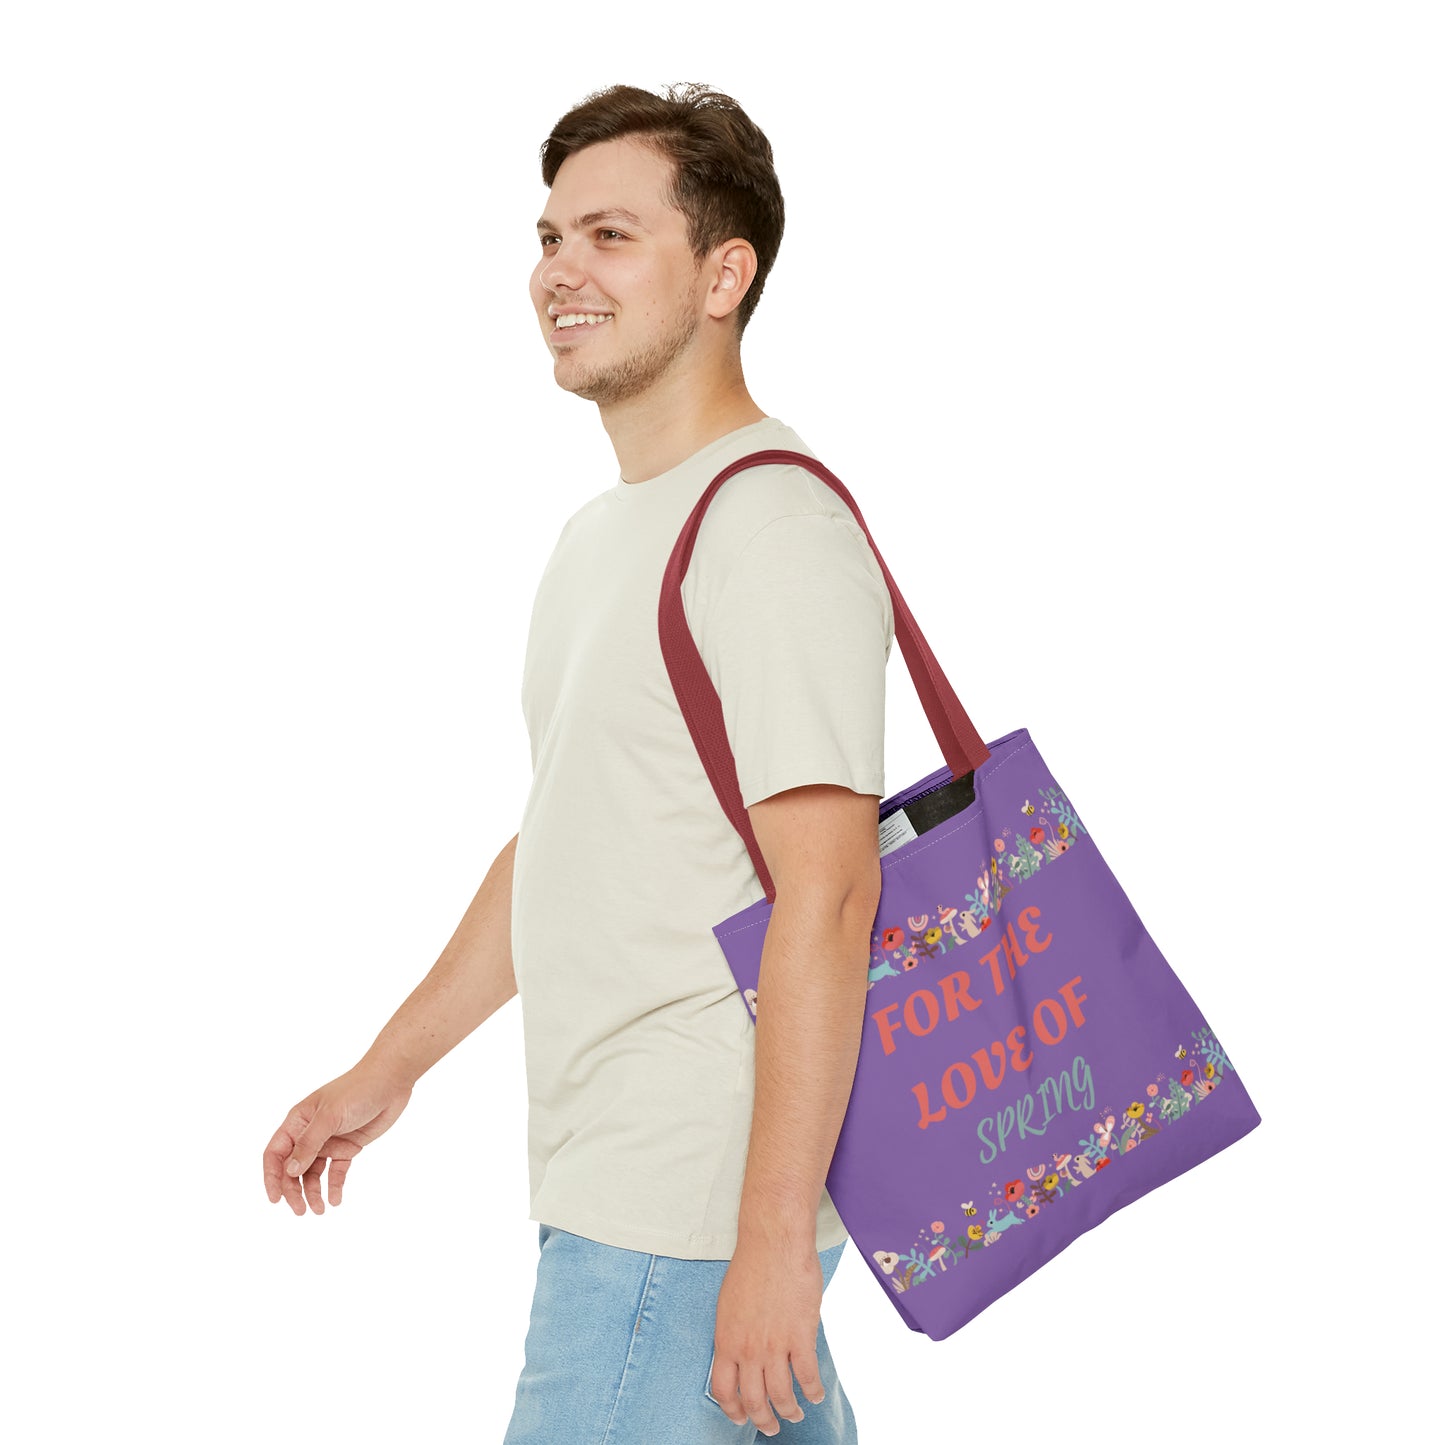 For The Love of Spring - Purple Tote Bag (AOP)